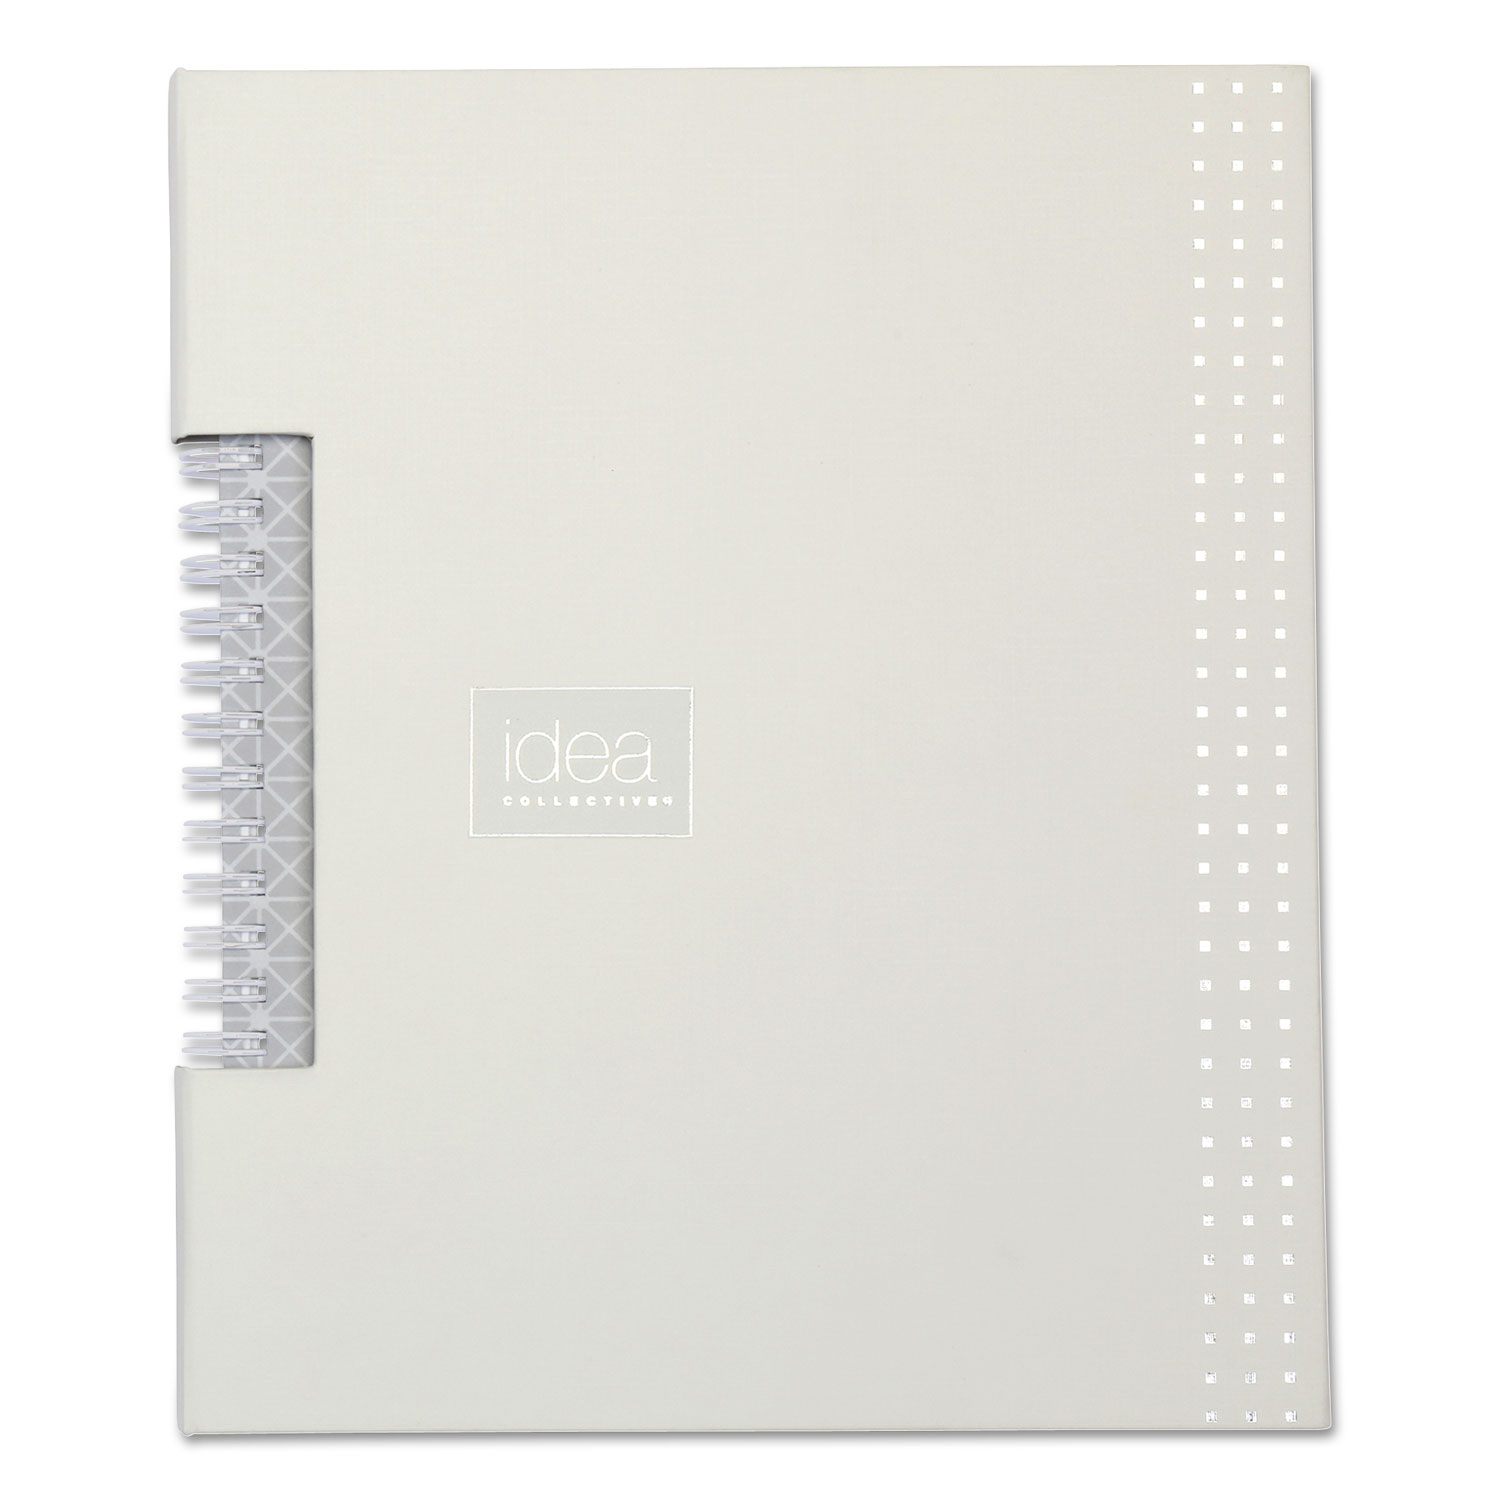 Idea Collective Professional Wirebound Notebook, White, 8 1/4 x 5 7/8, 80 Pages